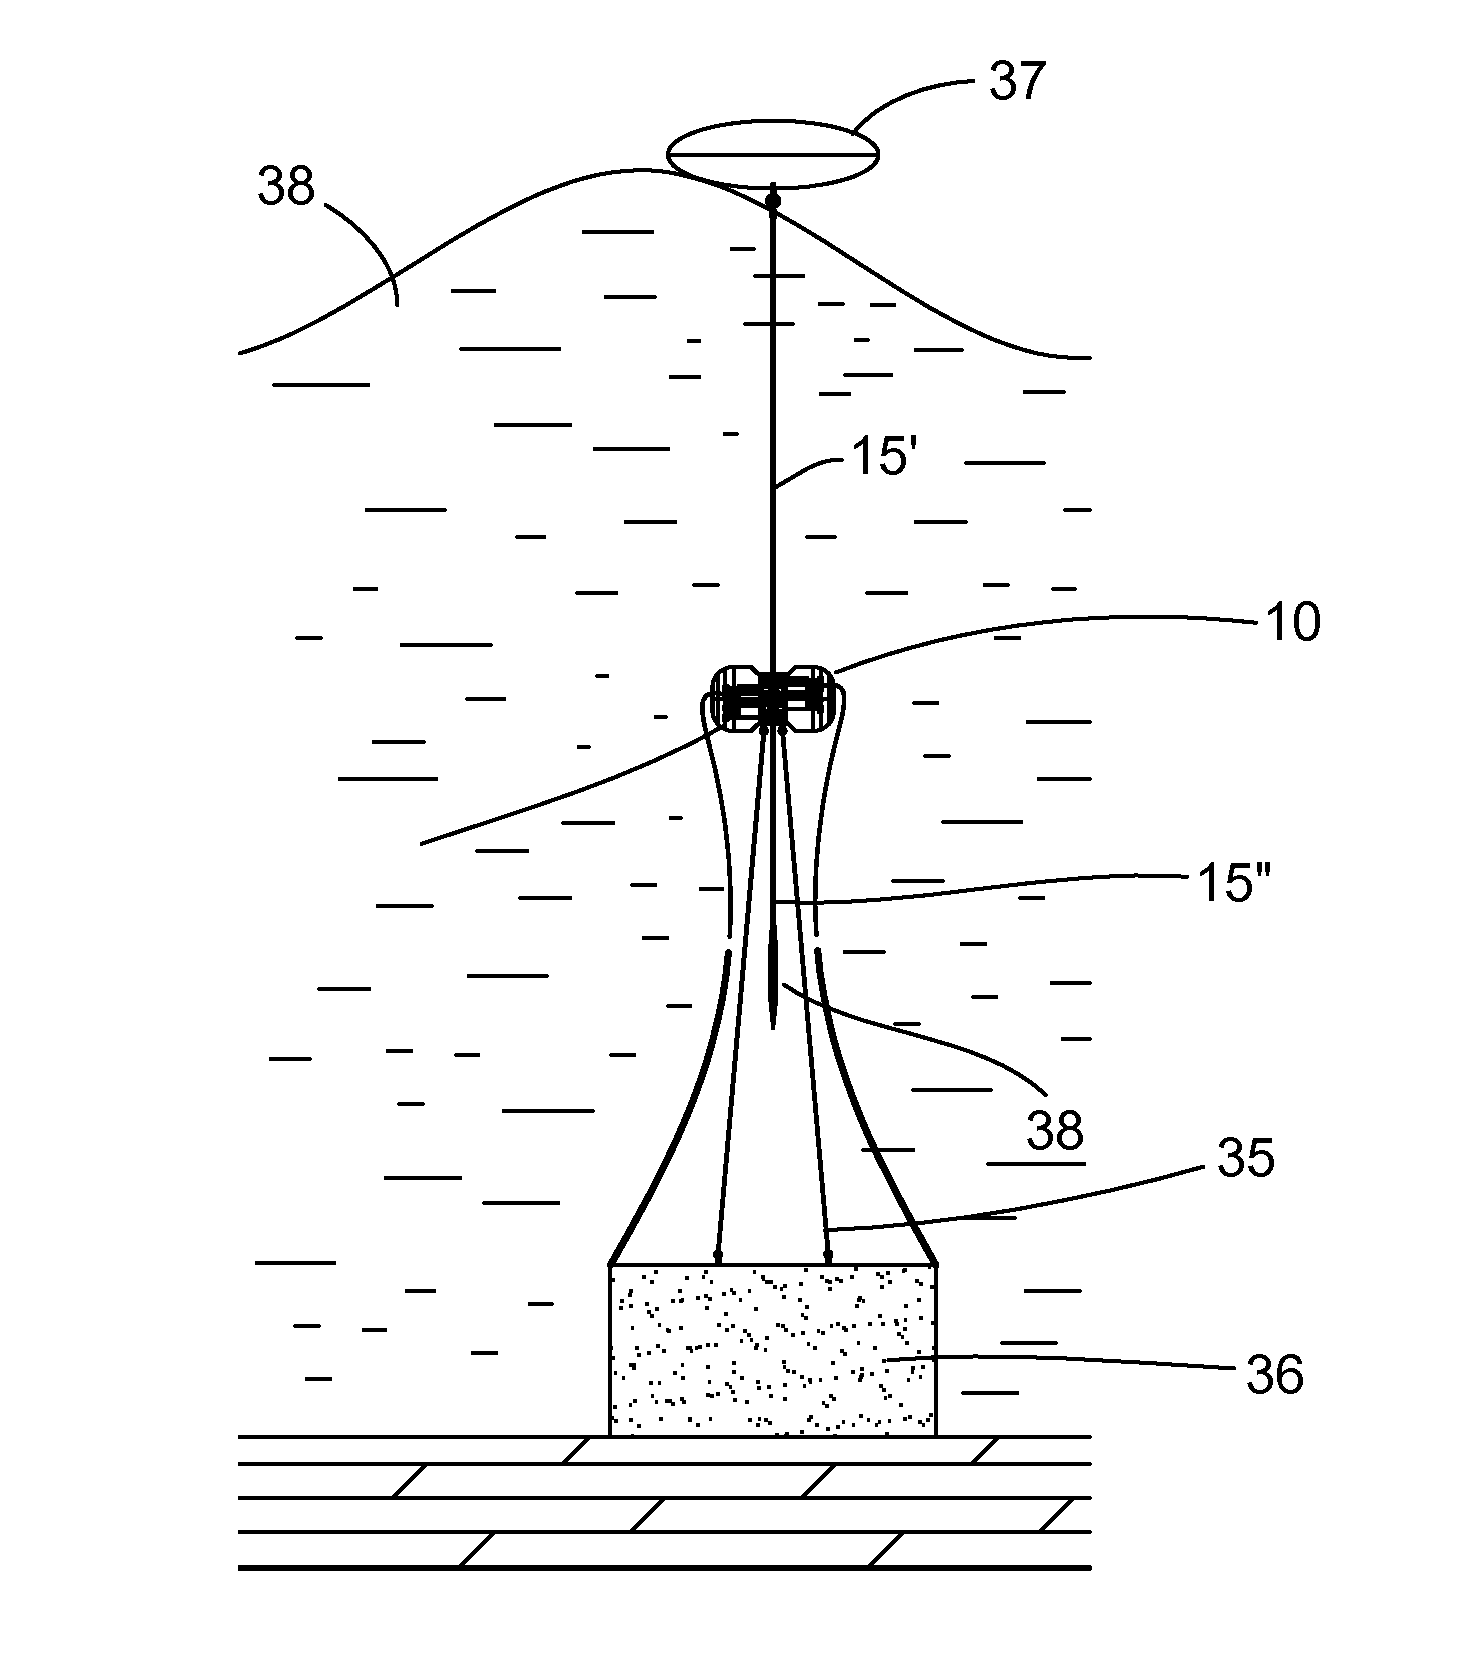 Apparatus for producing electric or mechanical energy from wave motion